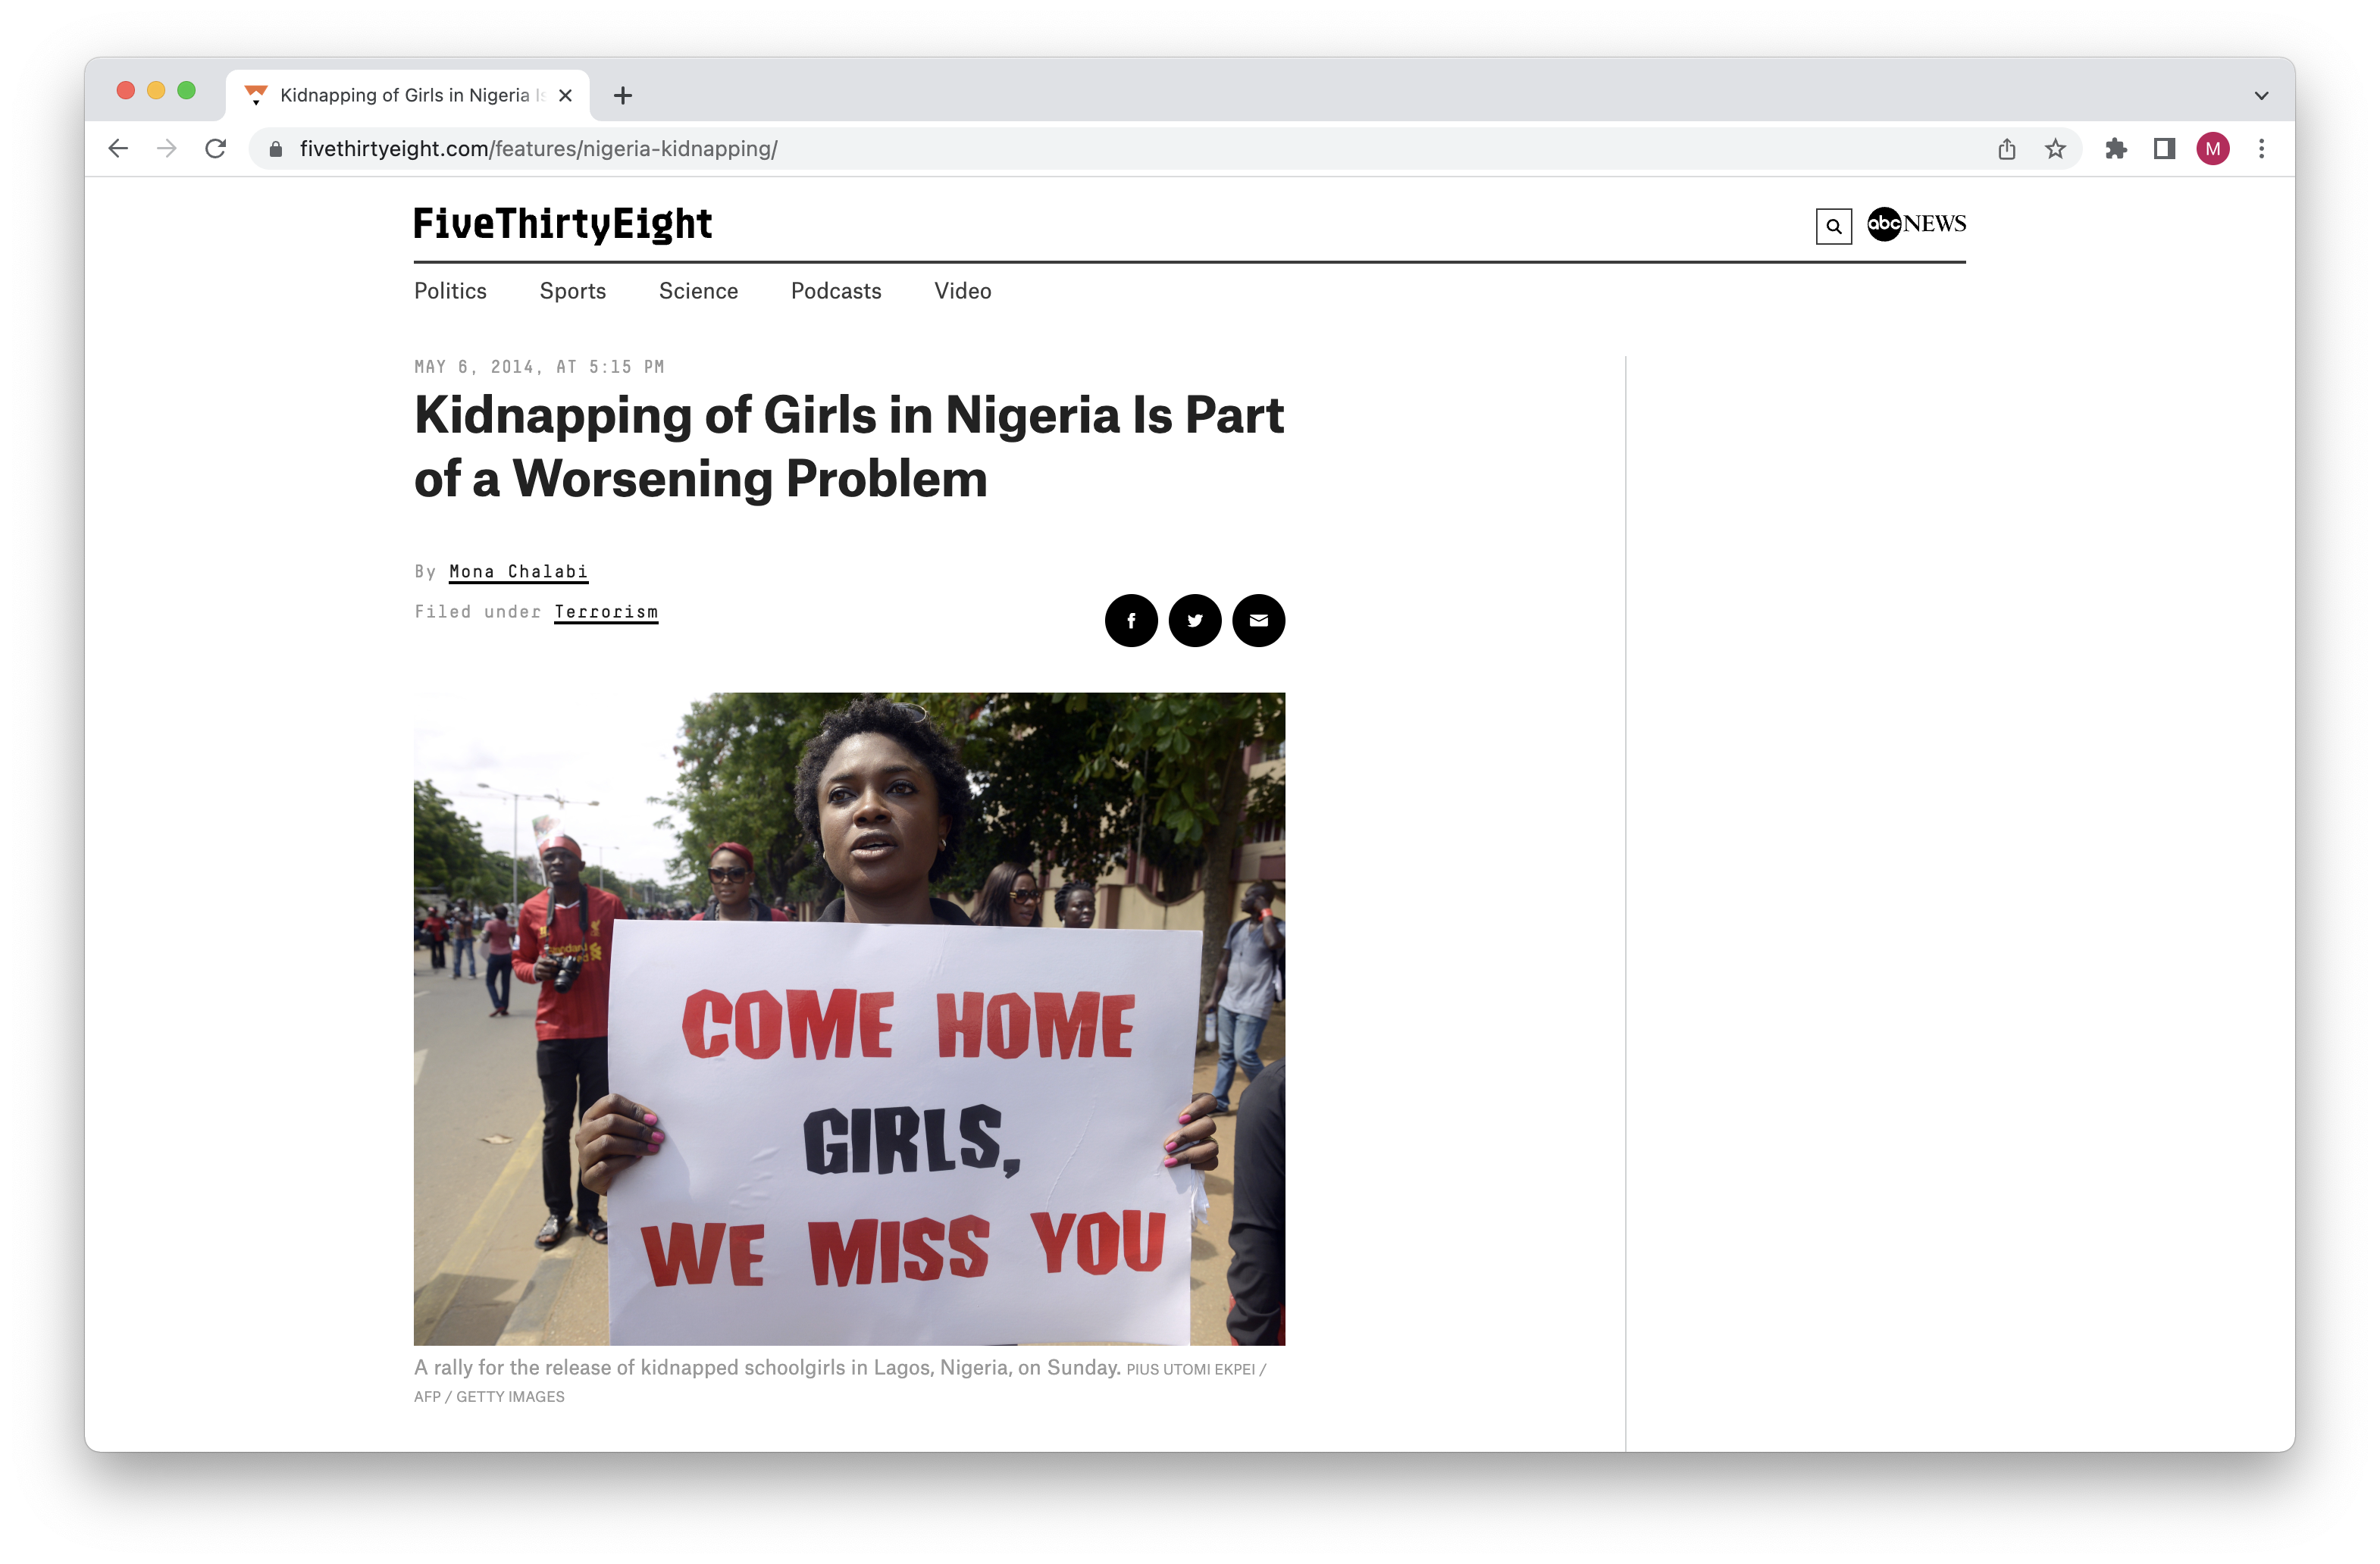 A web browser displaying the article 'Kidnapping of Girls in Nigeria Is Part of a Worsening Problem' on fivethirtyeight.com